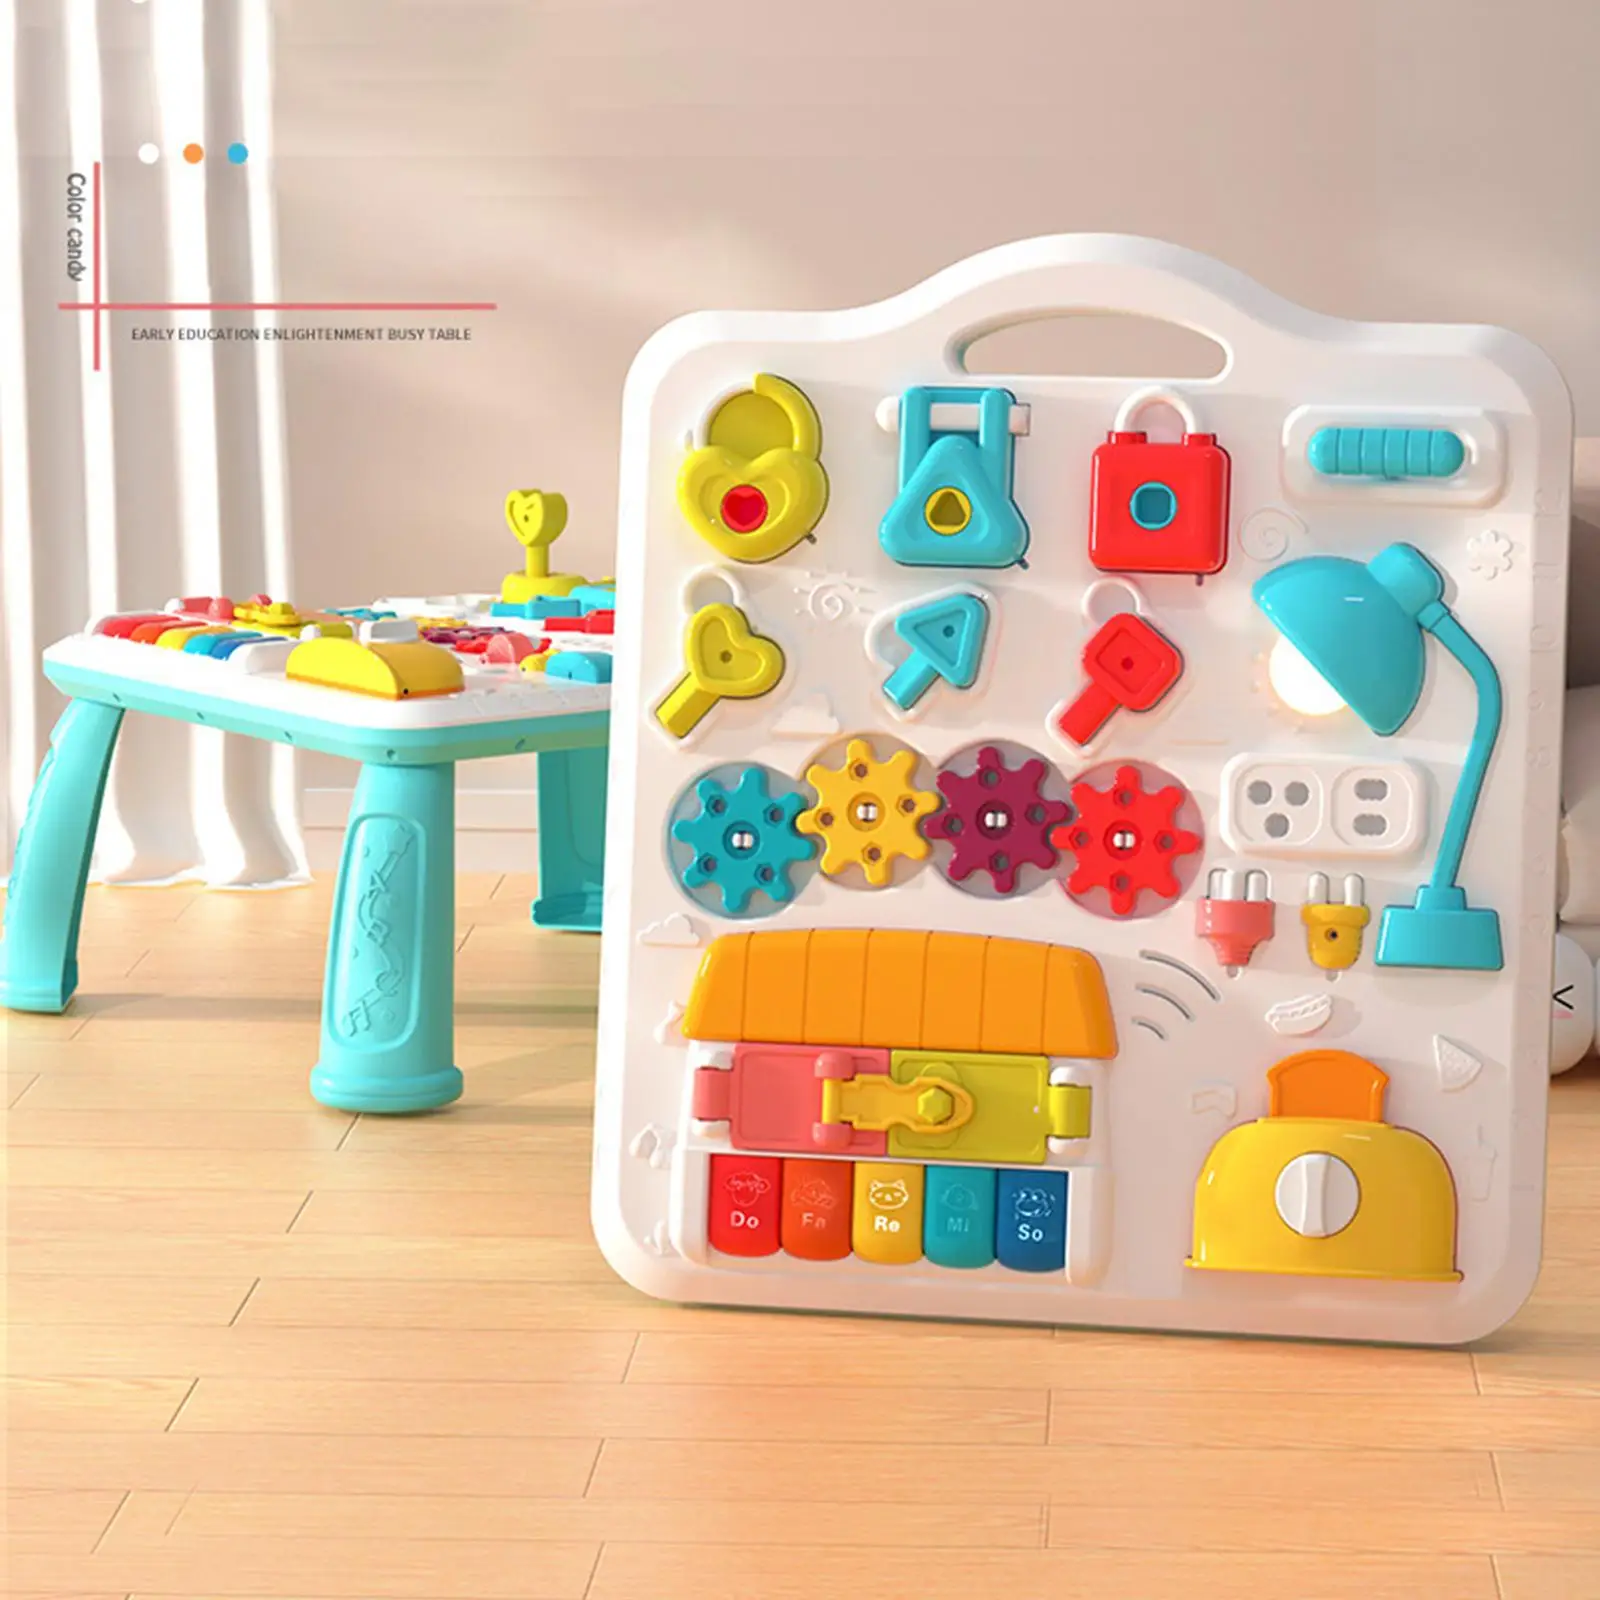 Multifunctional Activity Table Educational Toy with Leg Support Colorful Teaching Aids Detachable Busy Table for Gift Child Boys